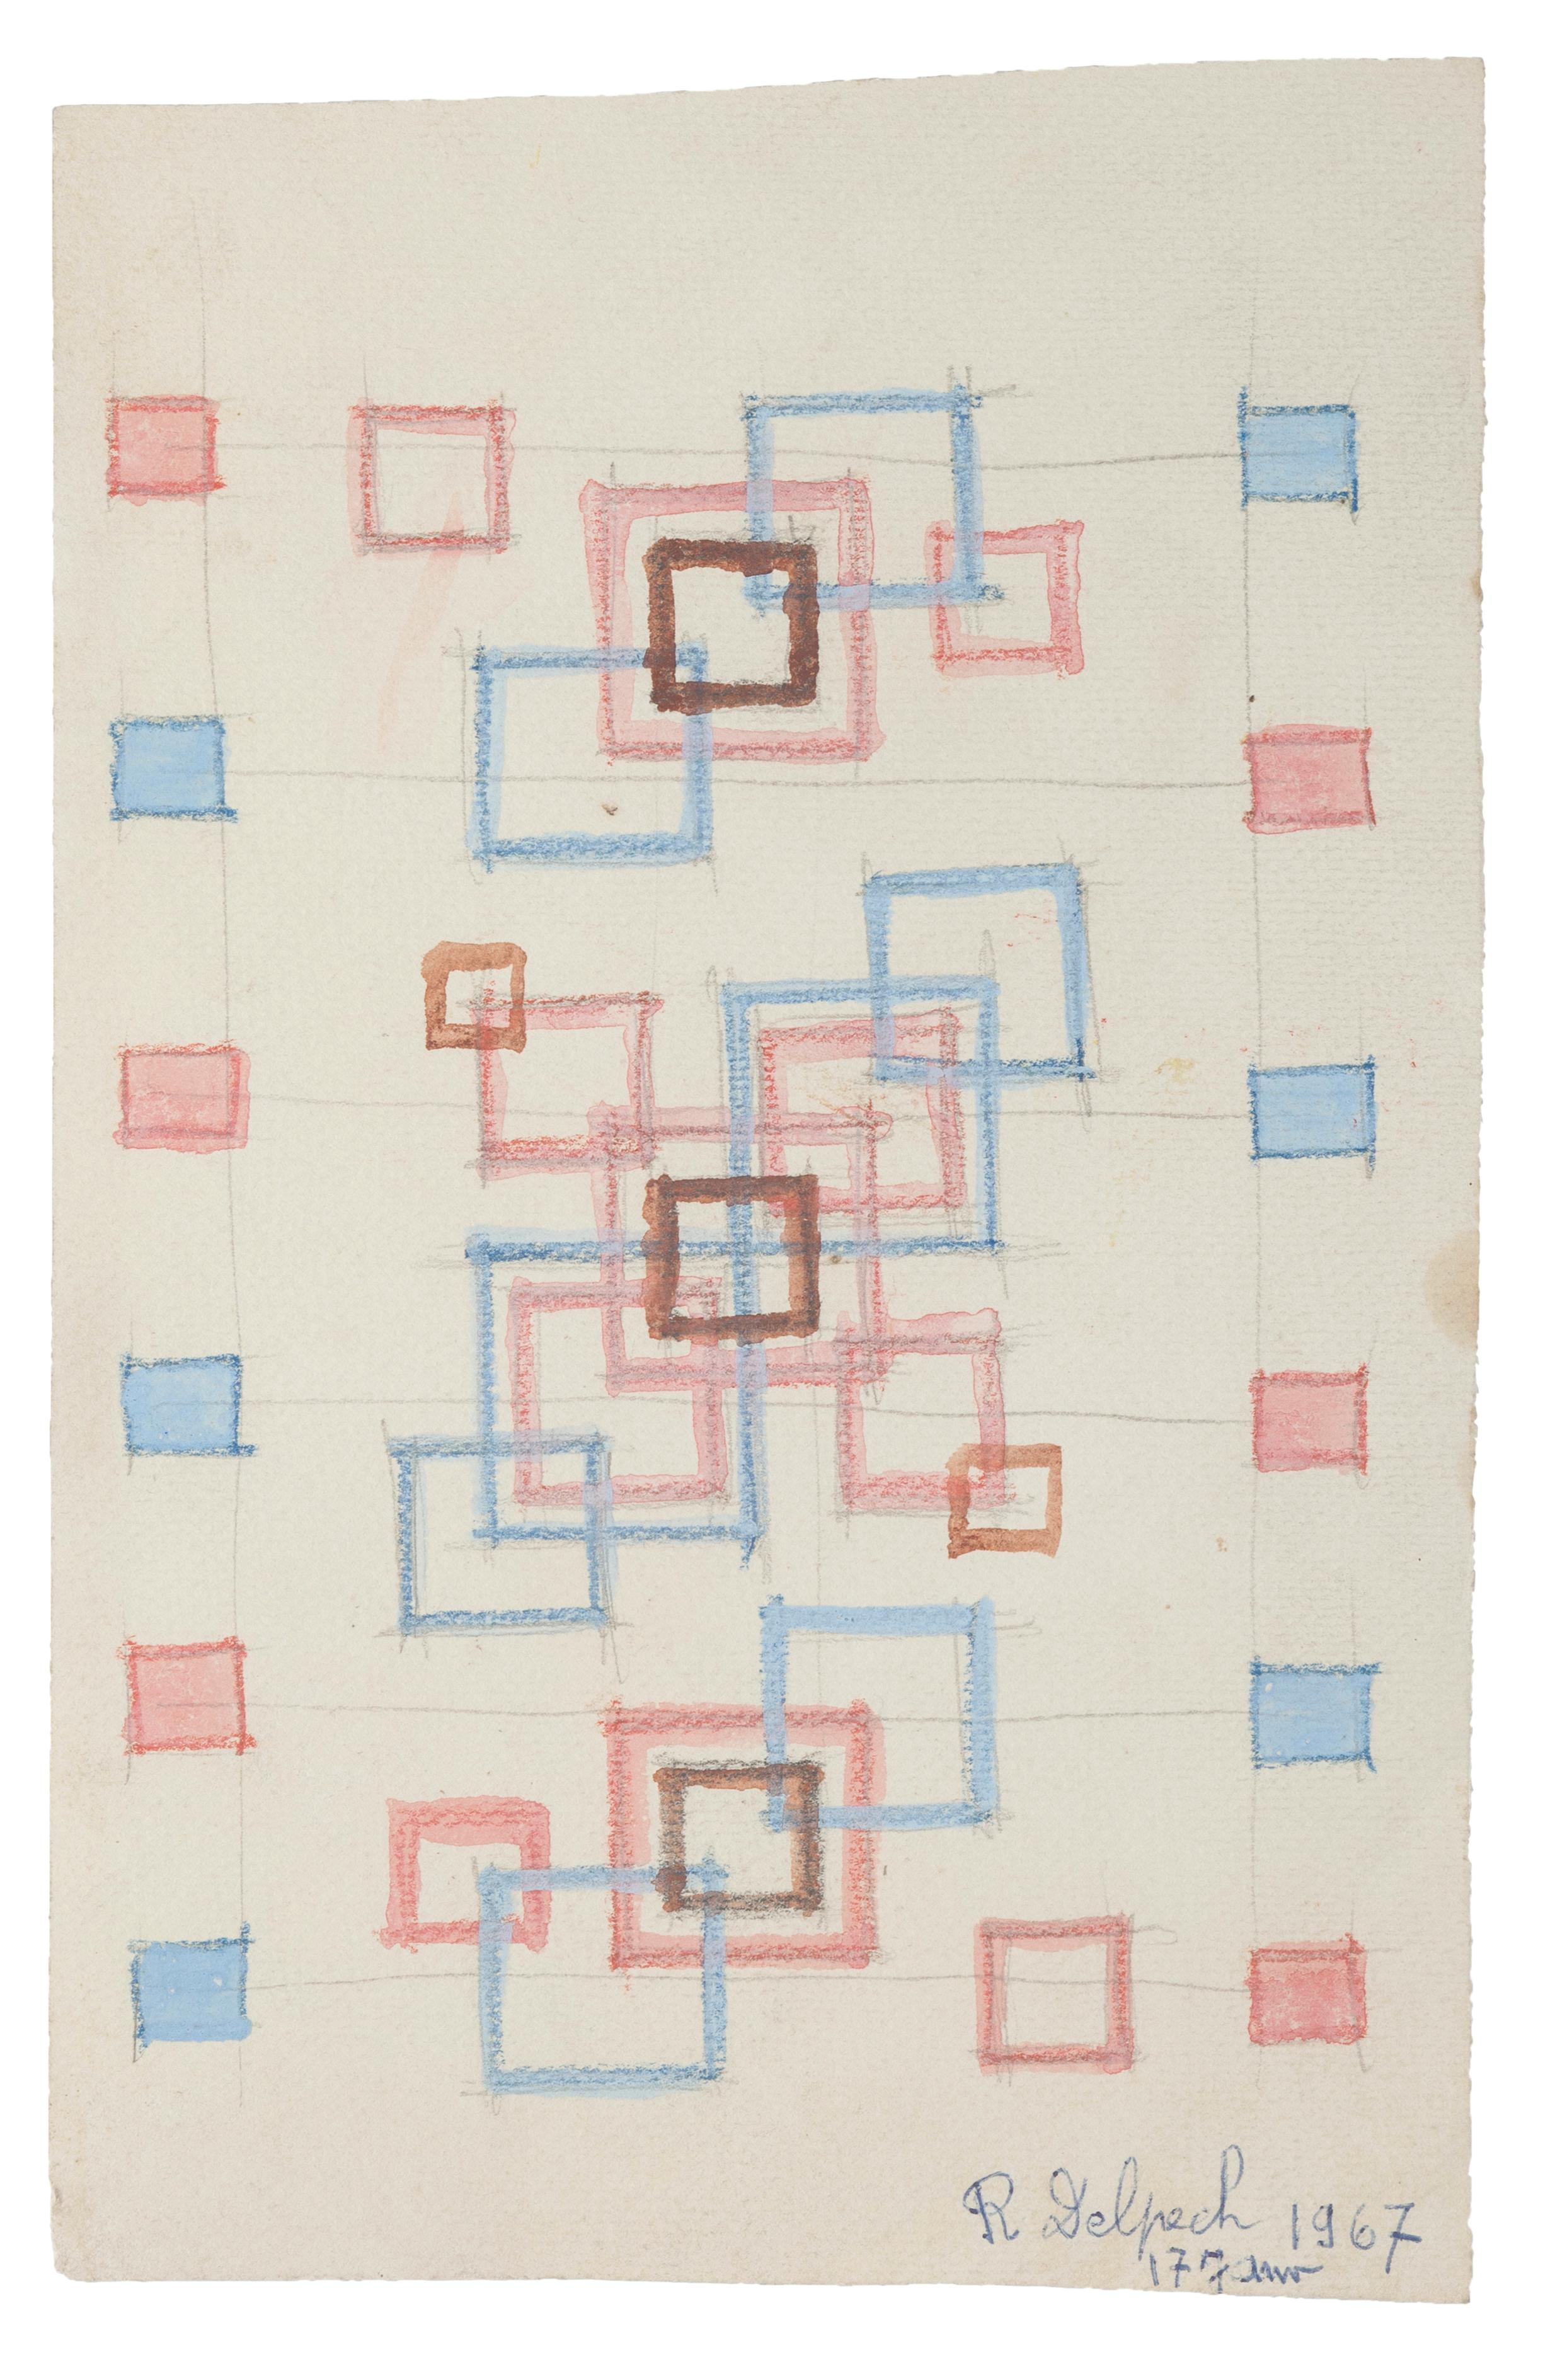 Jean Delpech Abstract Drawing -  Geometric Composition - Watercolor on Paper by J.-R. Delpech - 1967